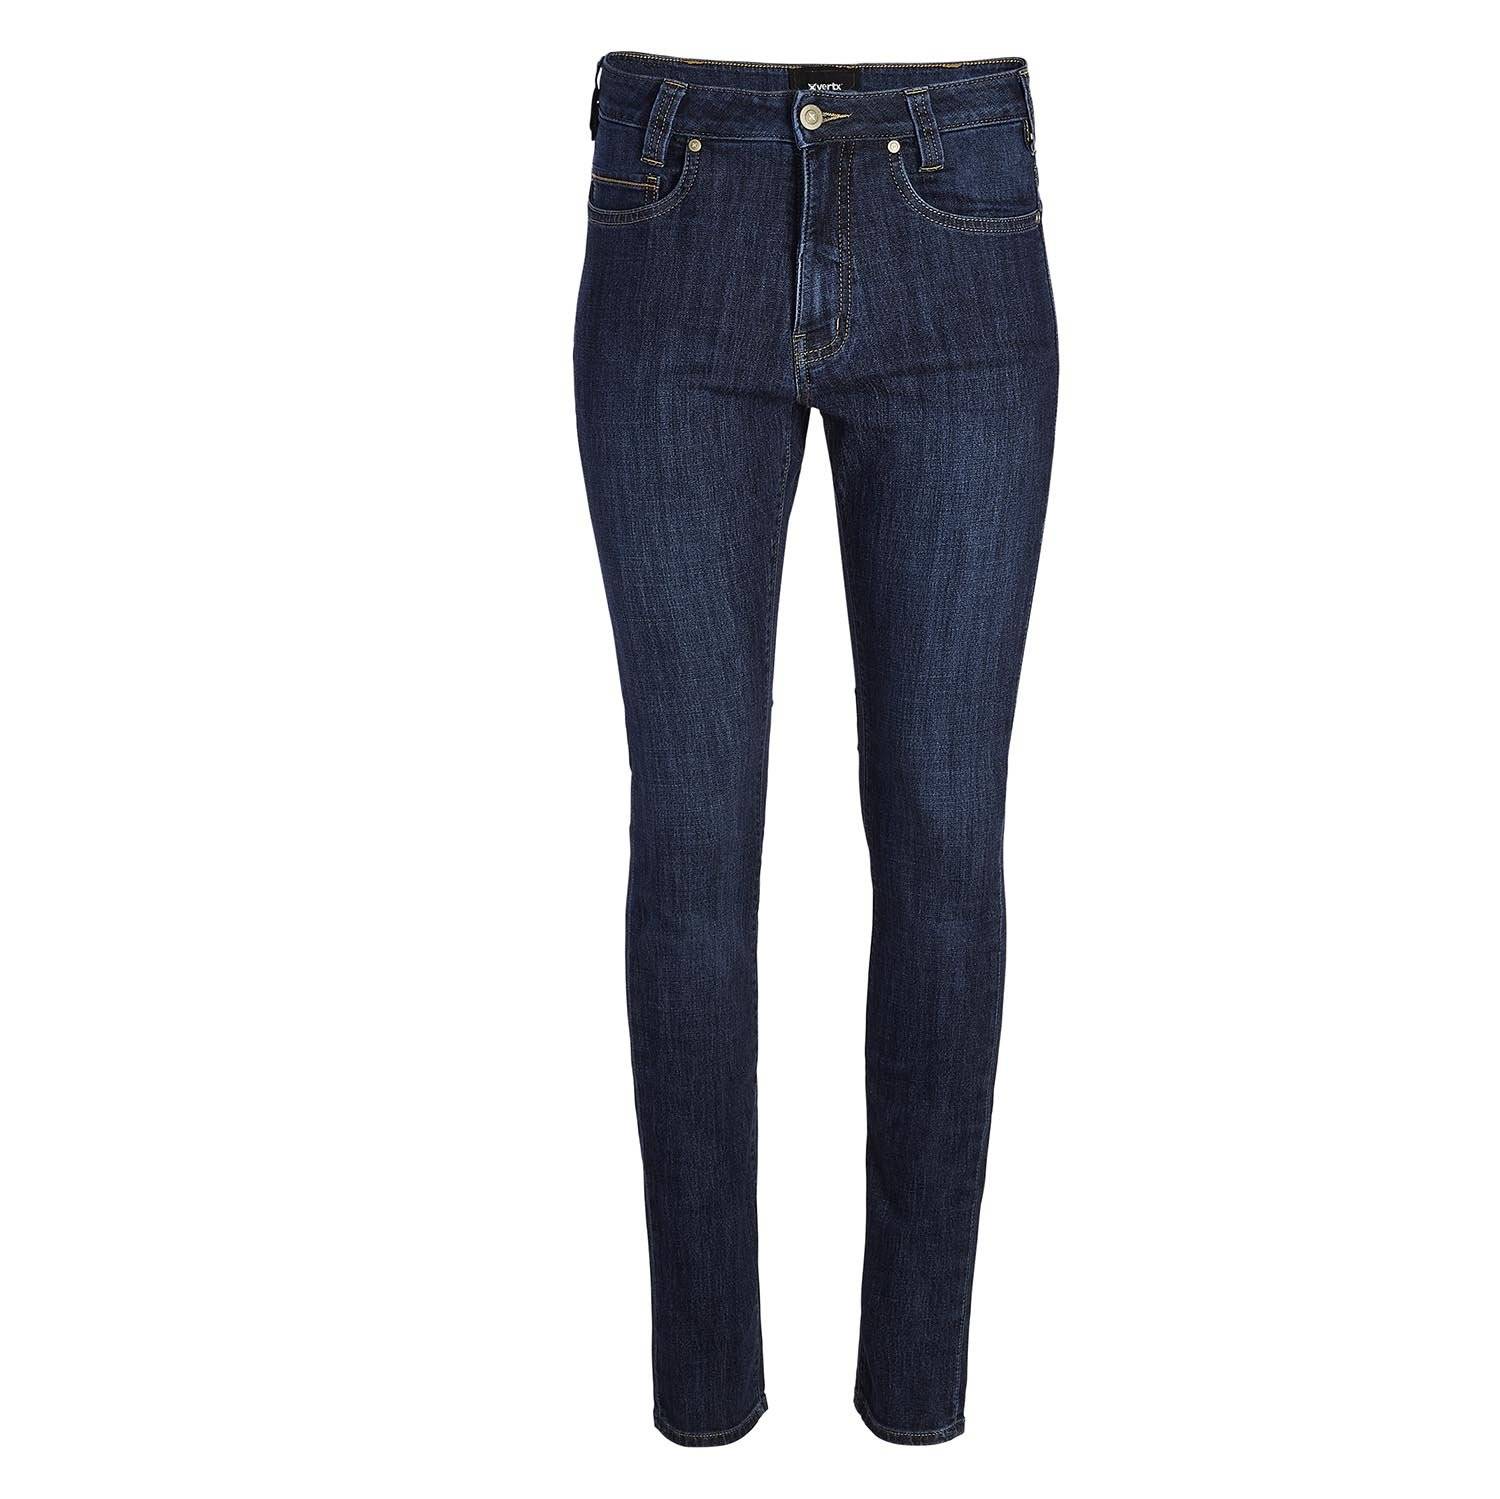 VERTX WOMEN'S HAYES HIGH RISE STRAIGHT CUT JEANS